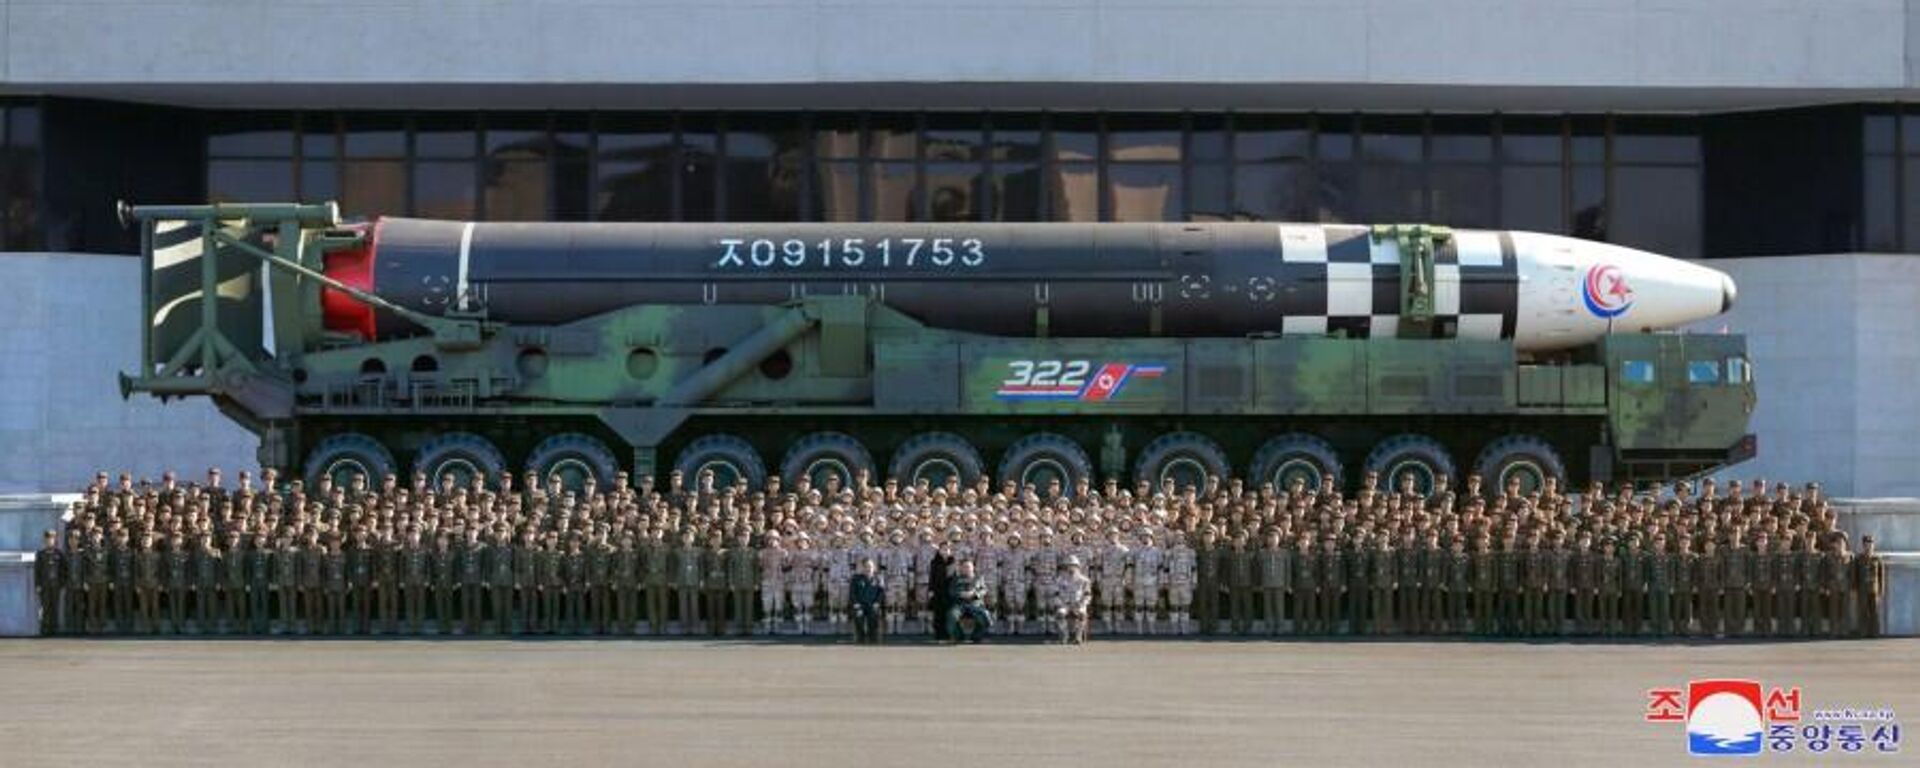 Kim Jong-un and scientists and military staff responsible for the development of the Hwasong-17 ICBM pose for a photo shoot. Sunday November 27, 2022. - Sputnik International, 1920, 27.11.2022